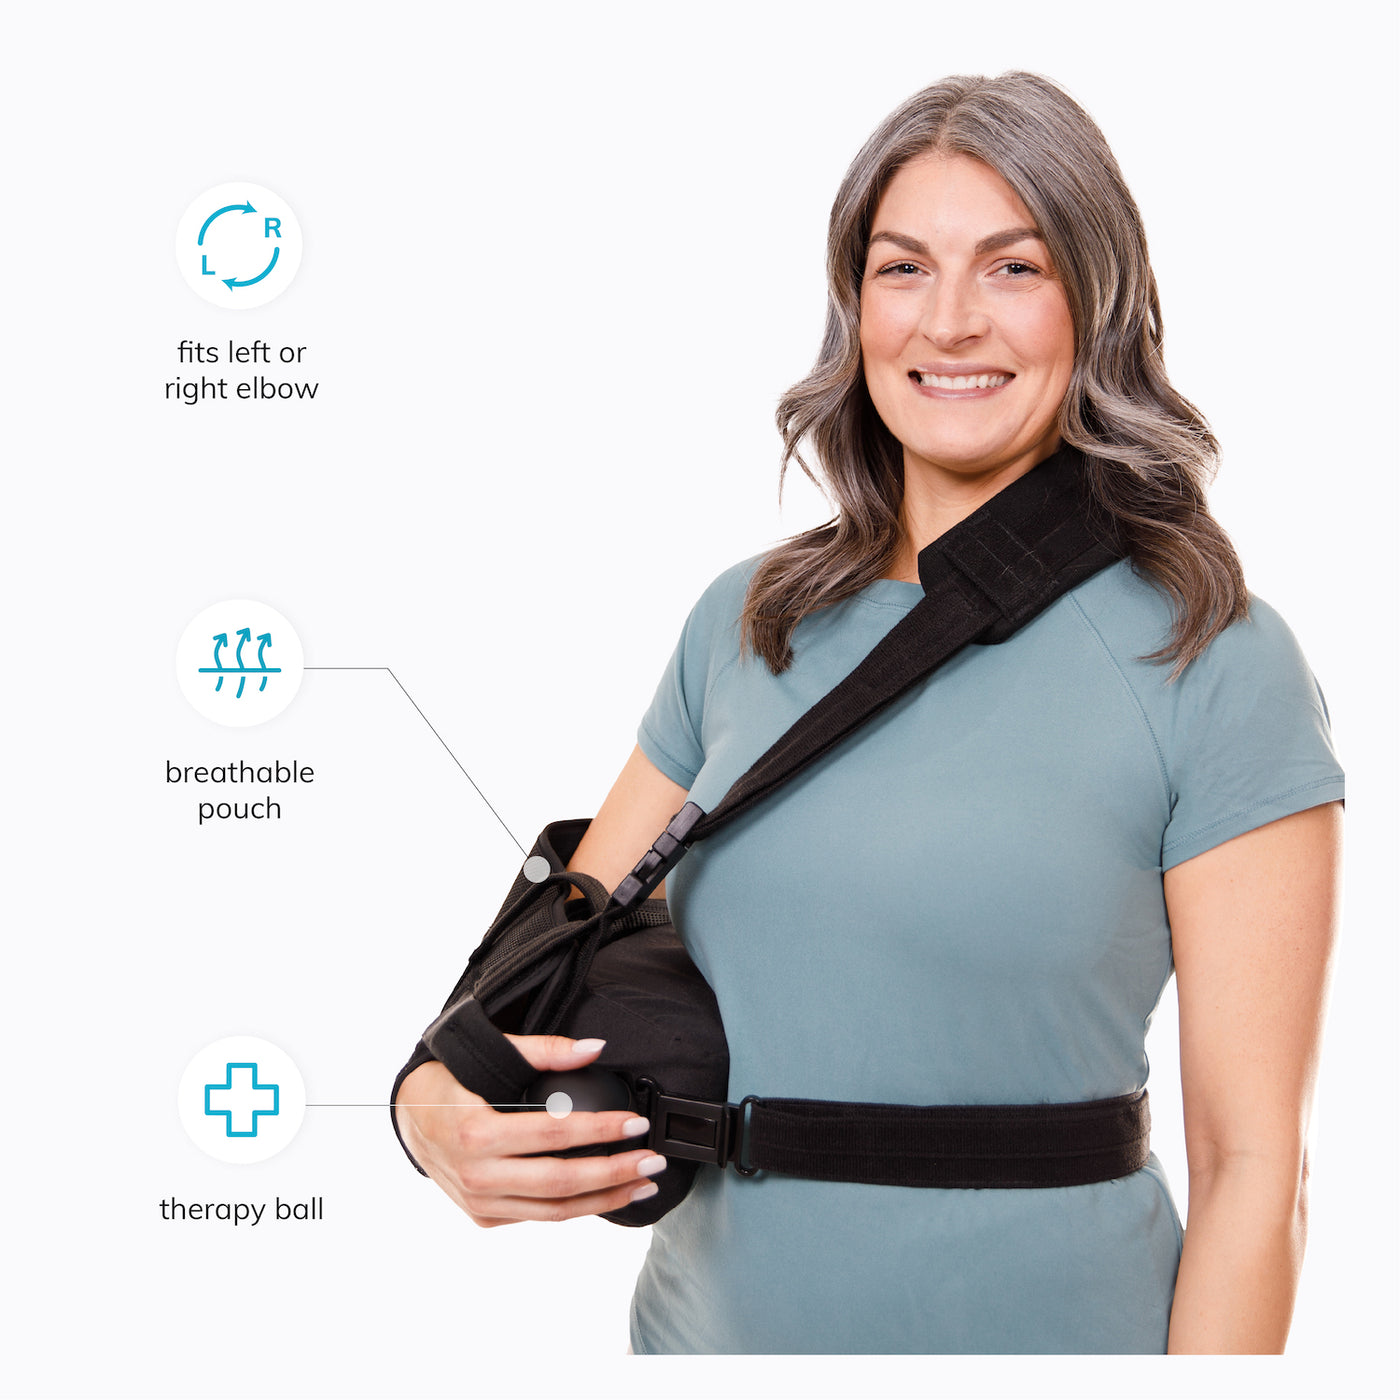 our rotator cuff shoulder brace can be used for the left or right elbow